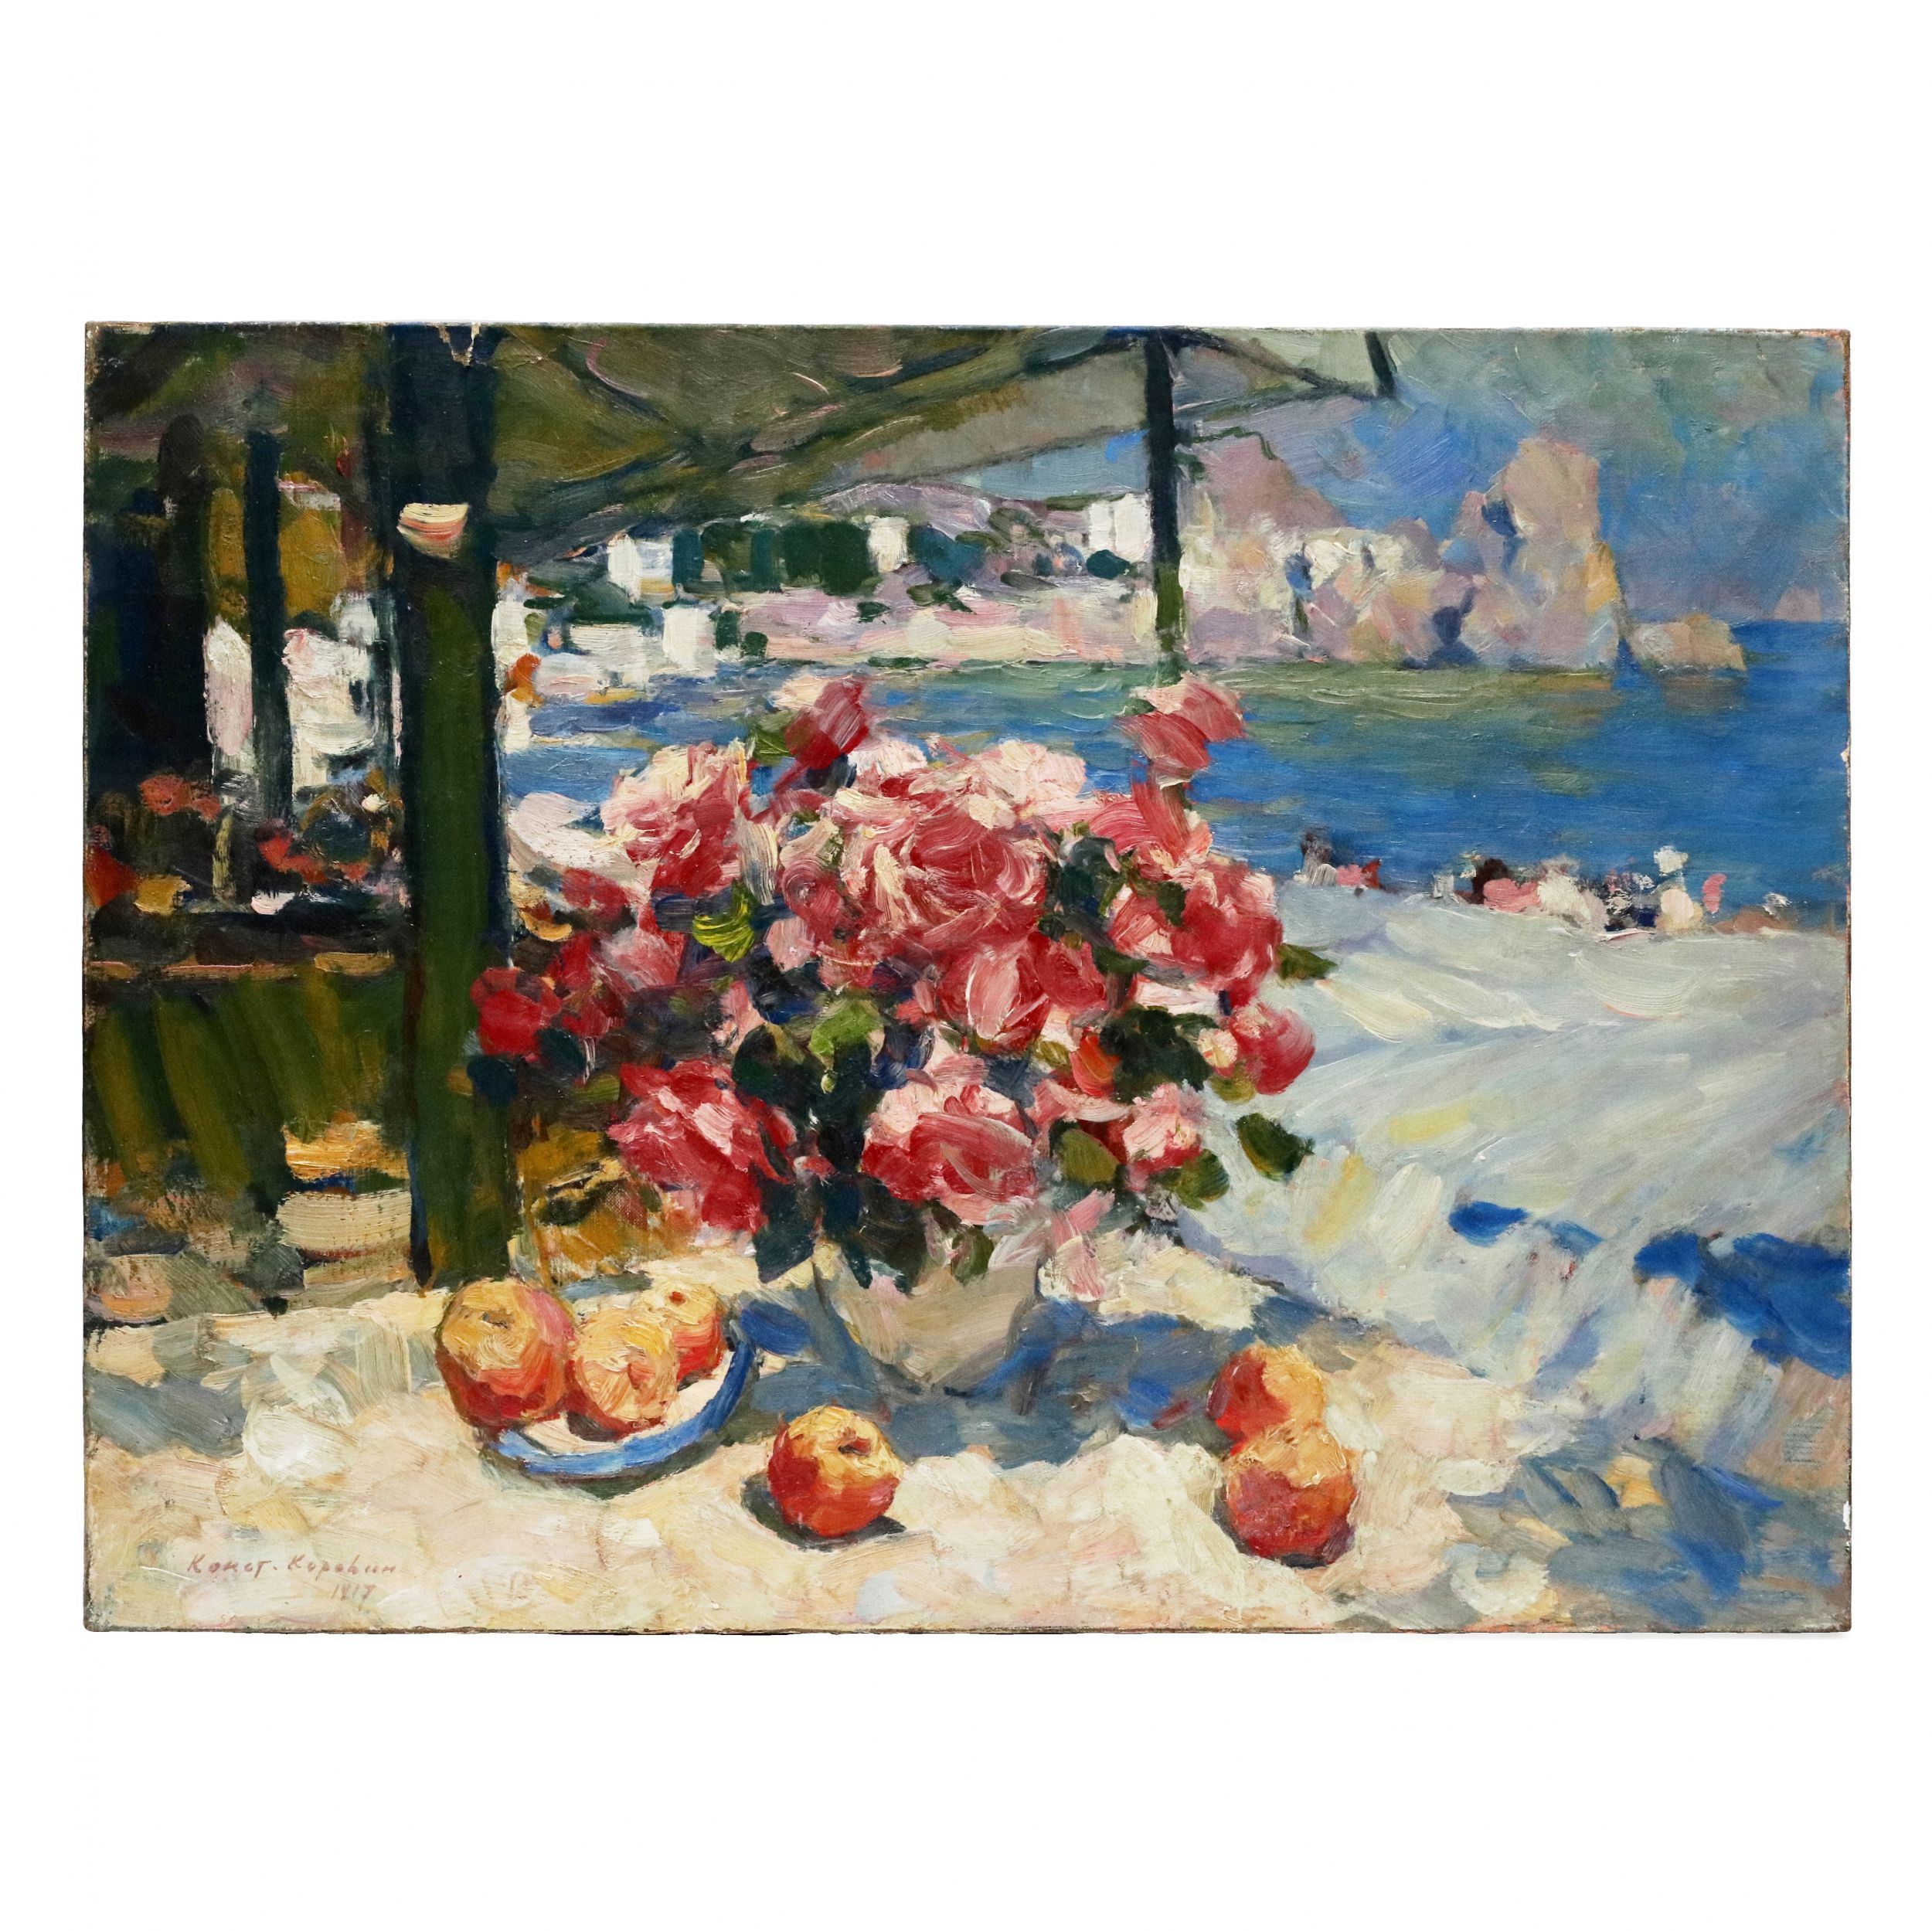 KONSTANTIN-KOROVIN-Gurzuf-Bouquet-of-roses-by-the-sea-1917